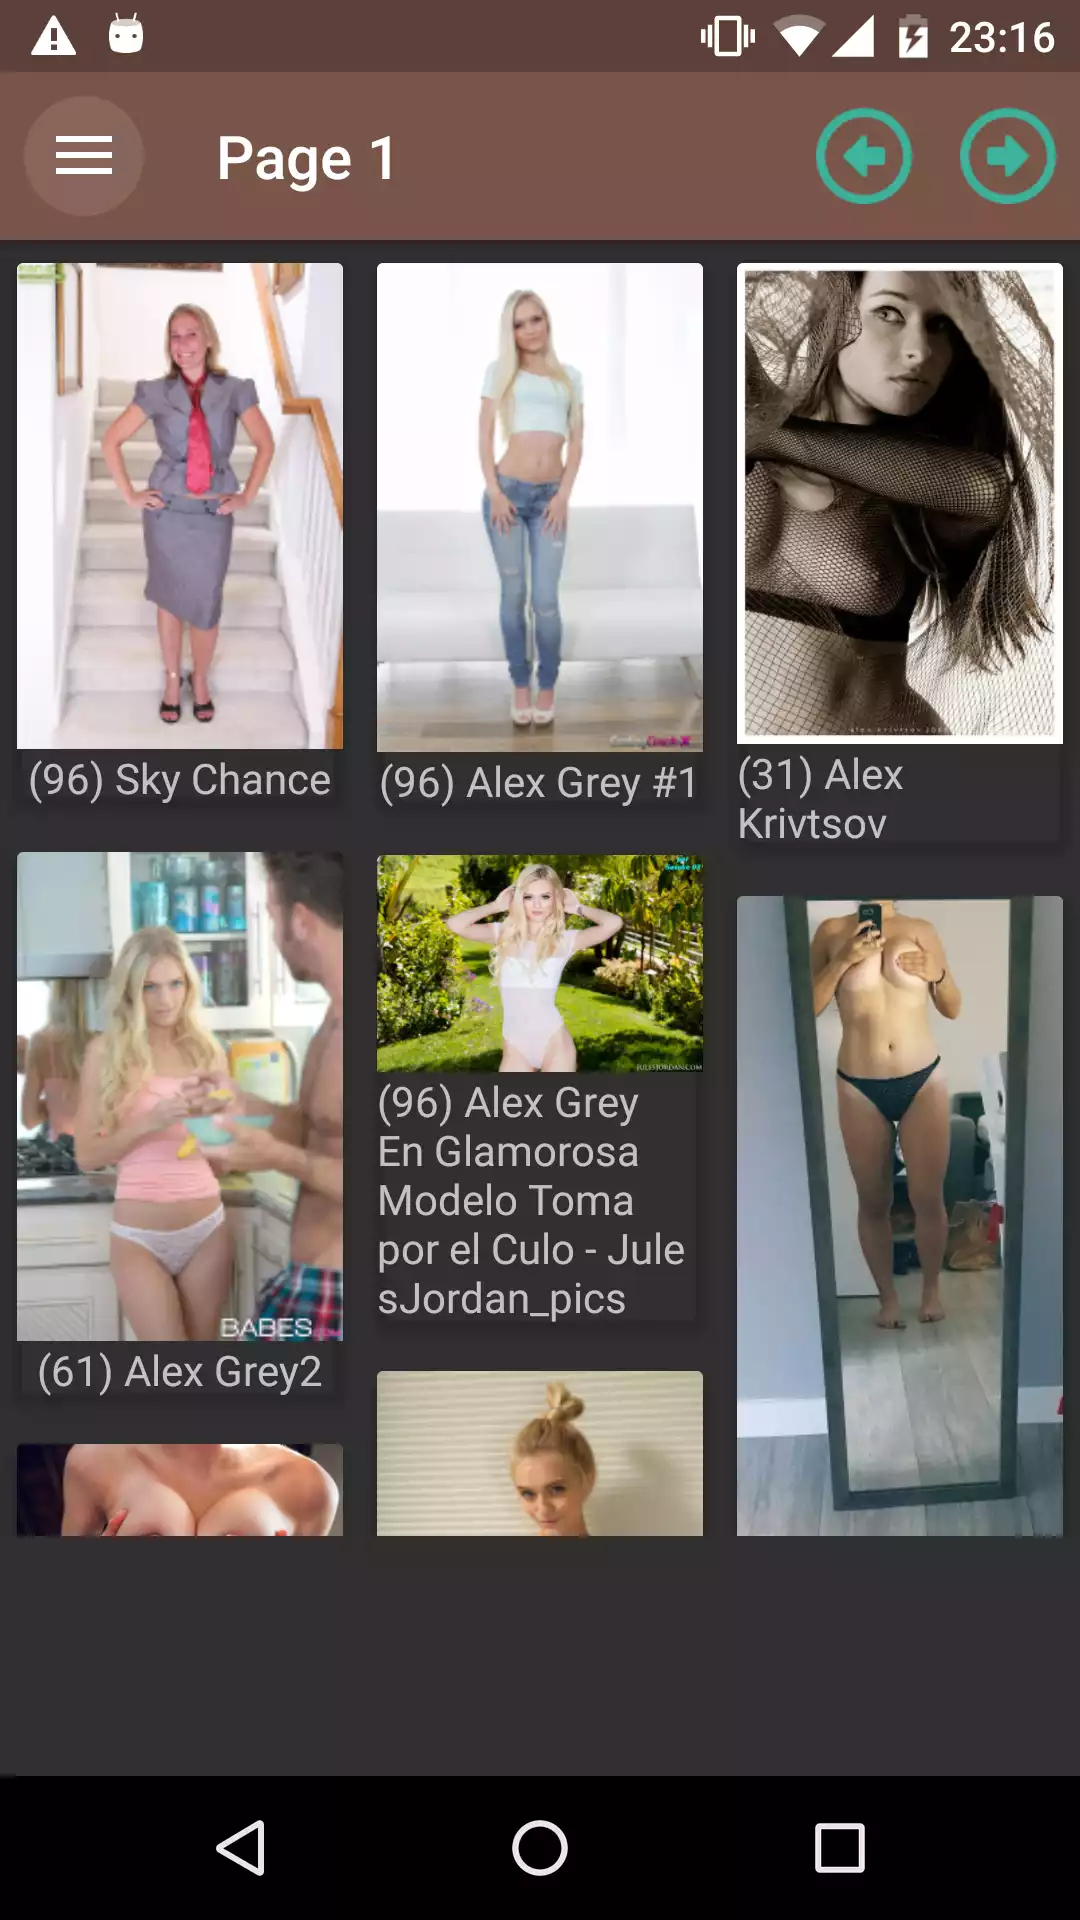 alex-chance hantai,android,baixar,free,hentai,erotic,gallery,galleries,apps,porn,gay,updates,backgrounds,app,sexy,pic,download,cuckold,pictures,wallpapers,game,apk